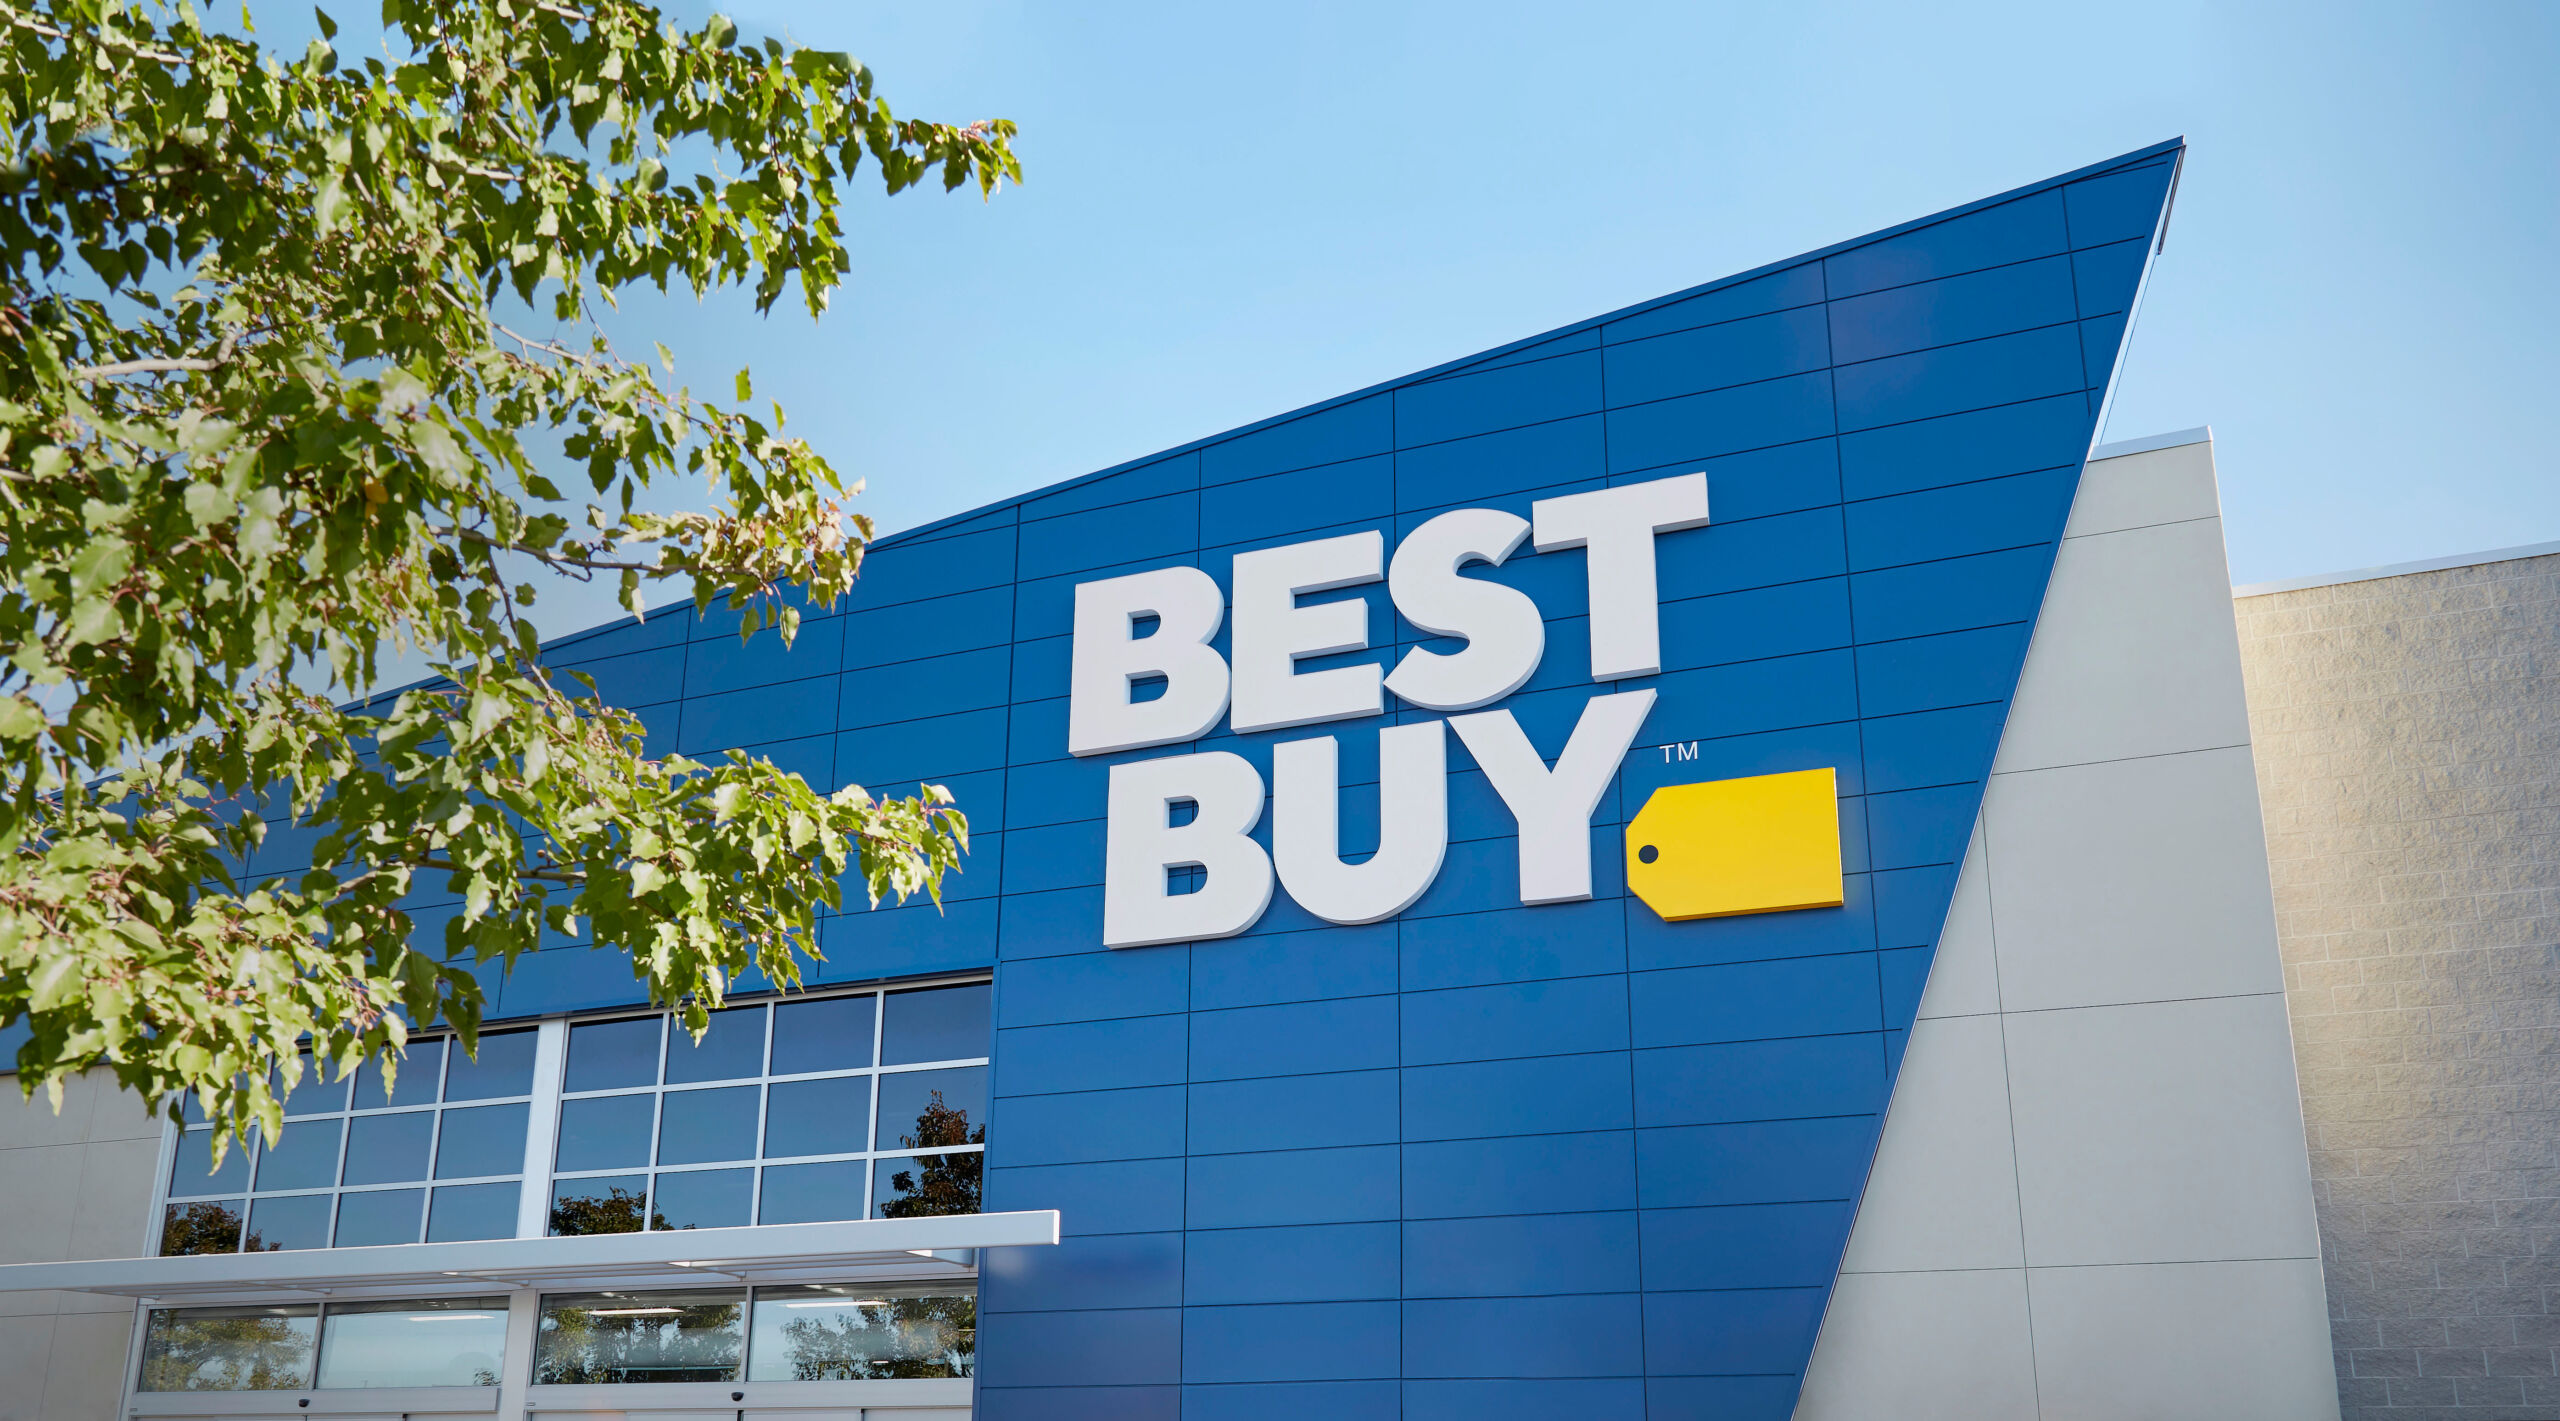 exterior view of a Best Buy retail store